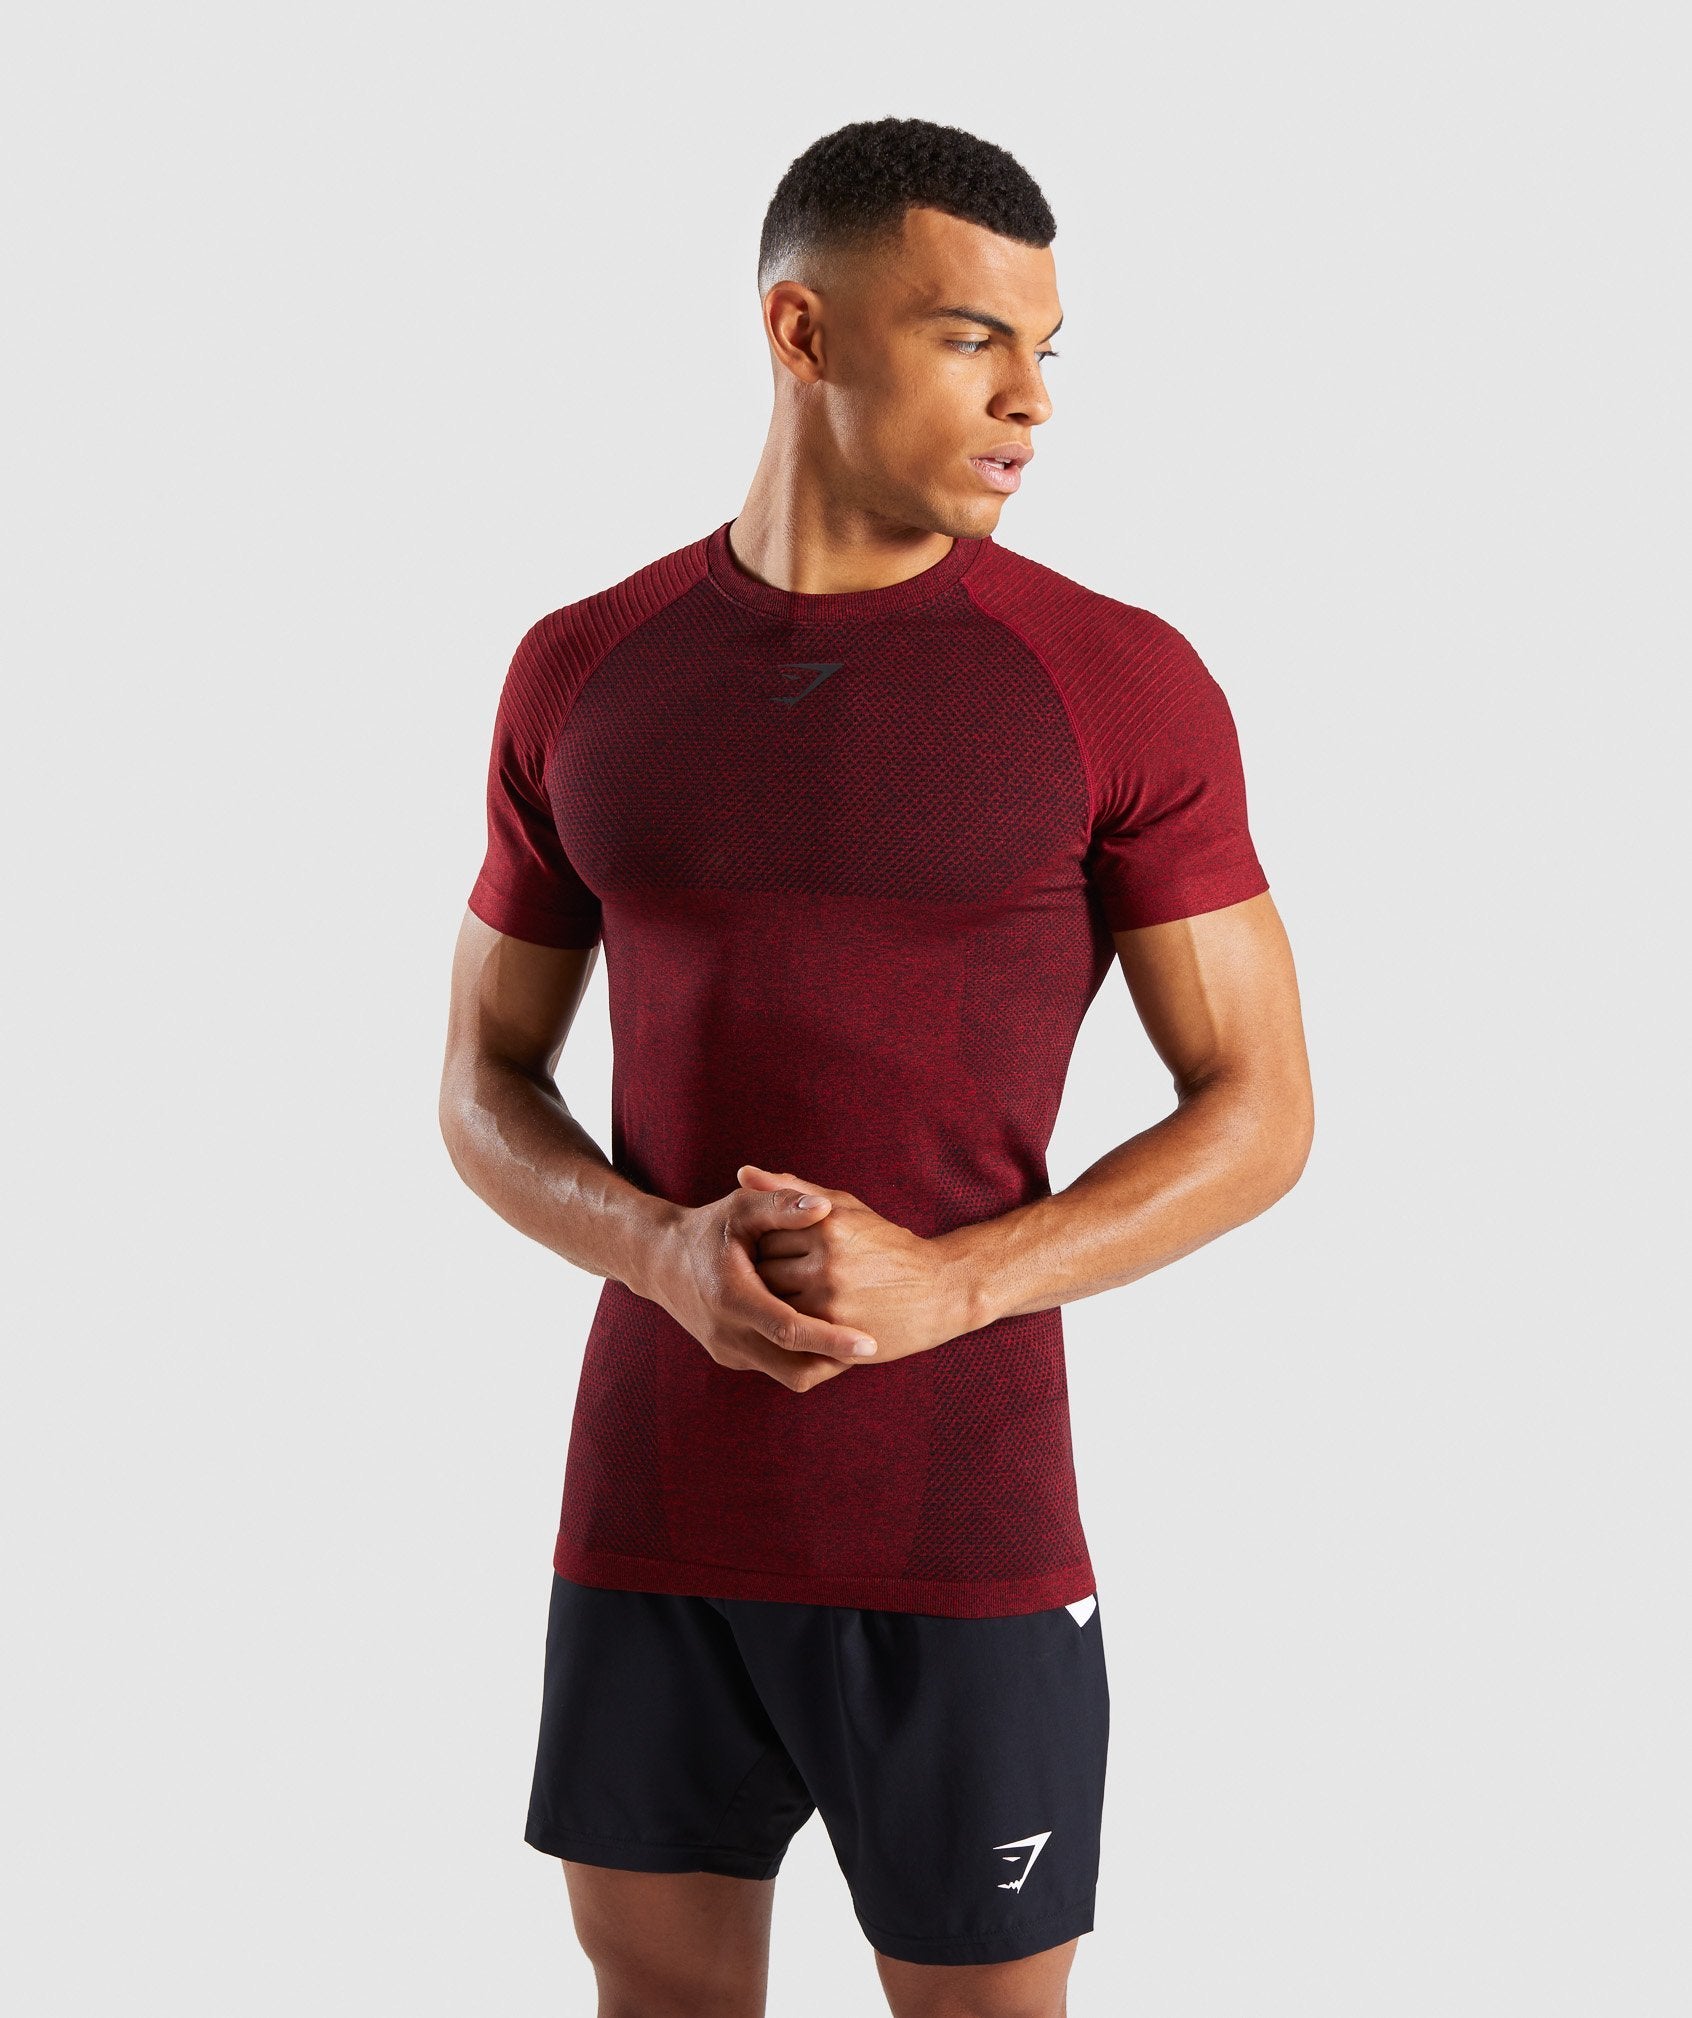 Premium Seamless T-Shirt in Red Marl - view 1